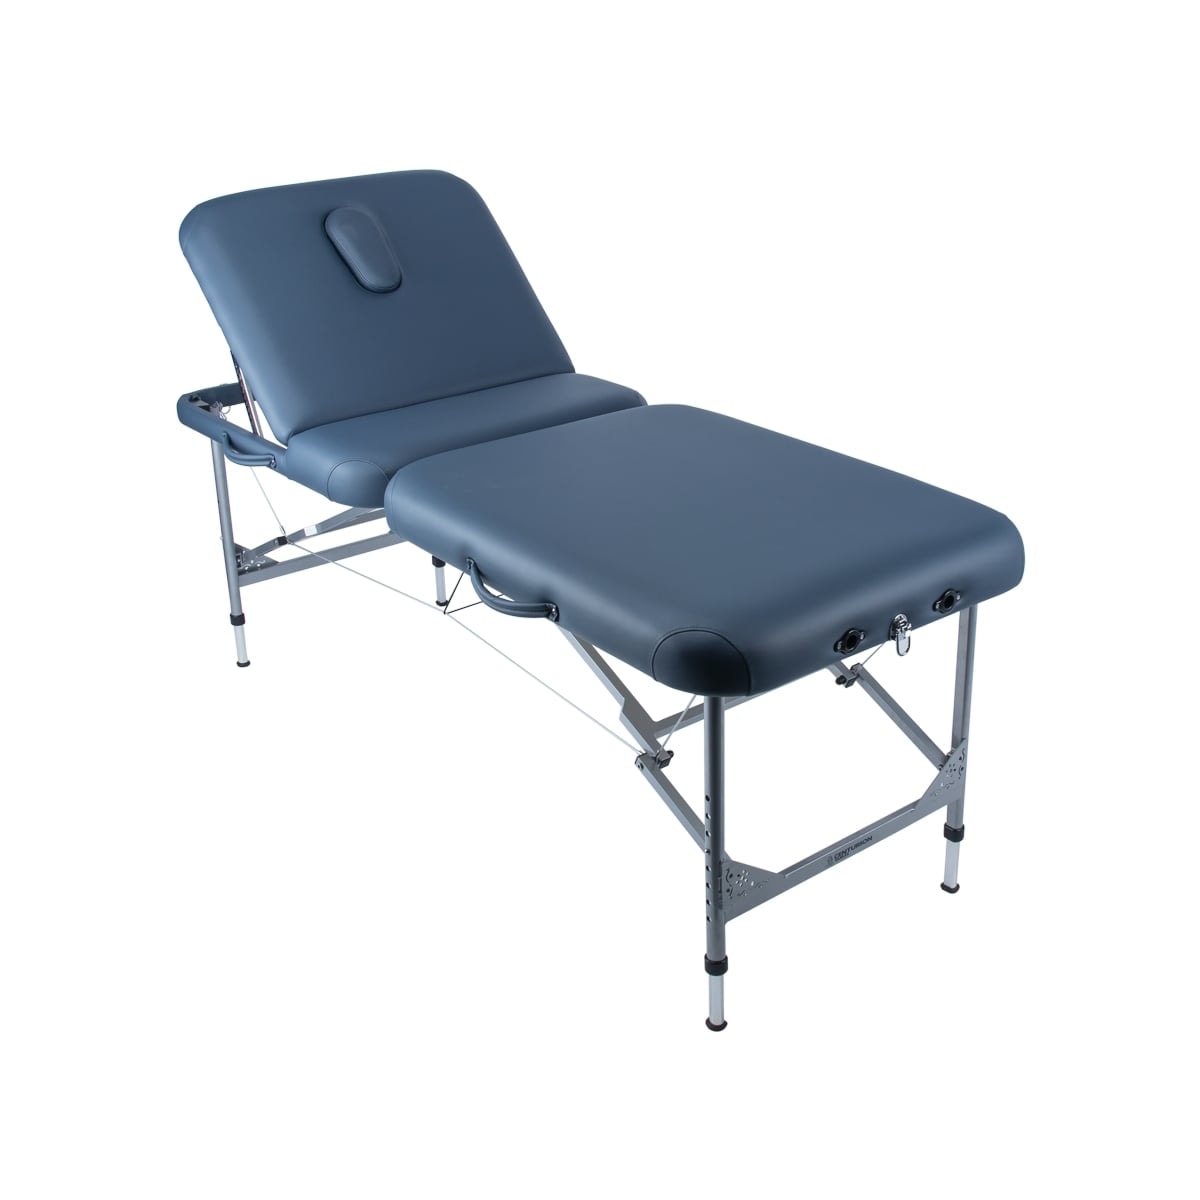 Centurion Elite ABR is the perfect portable table.